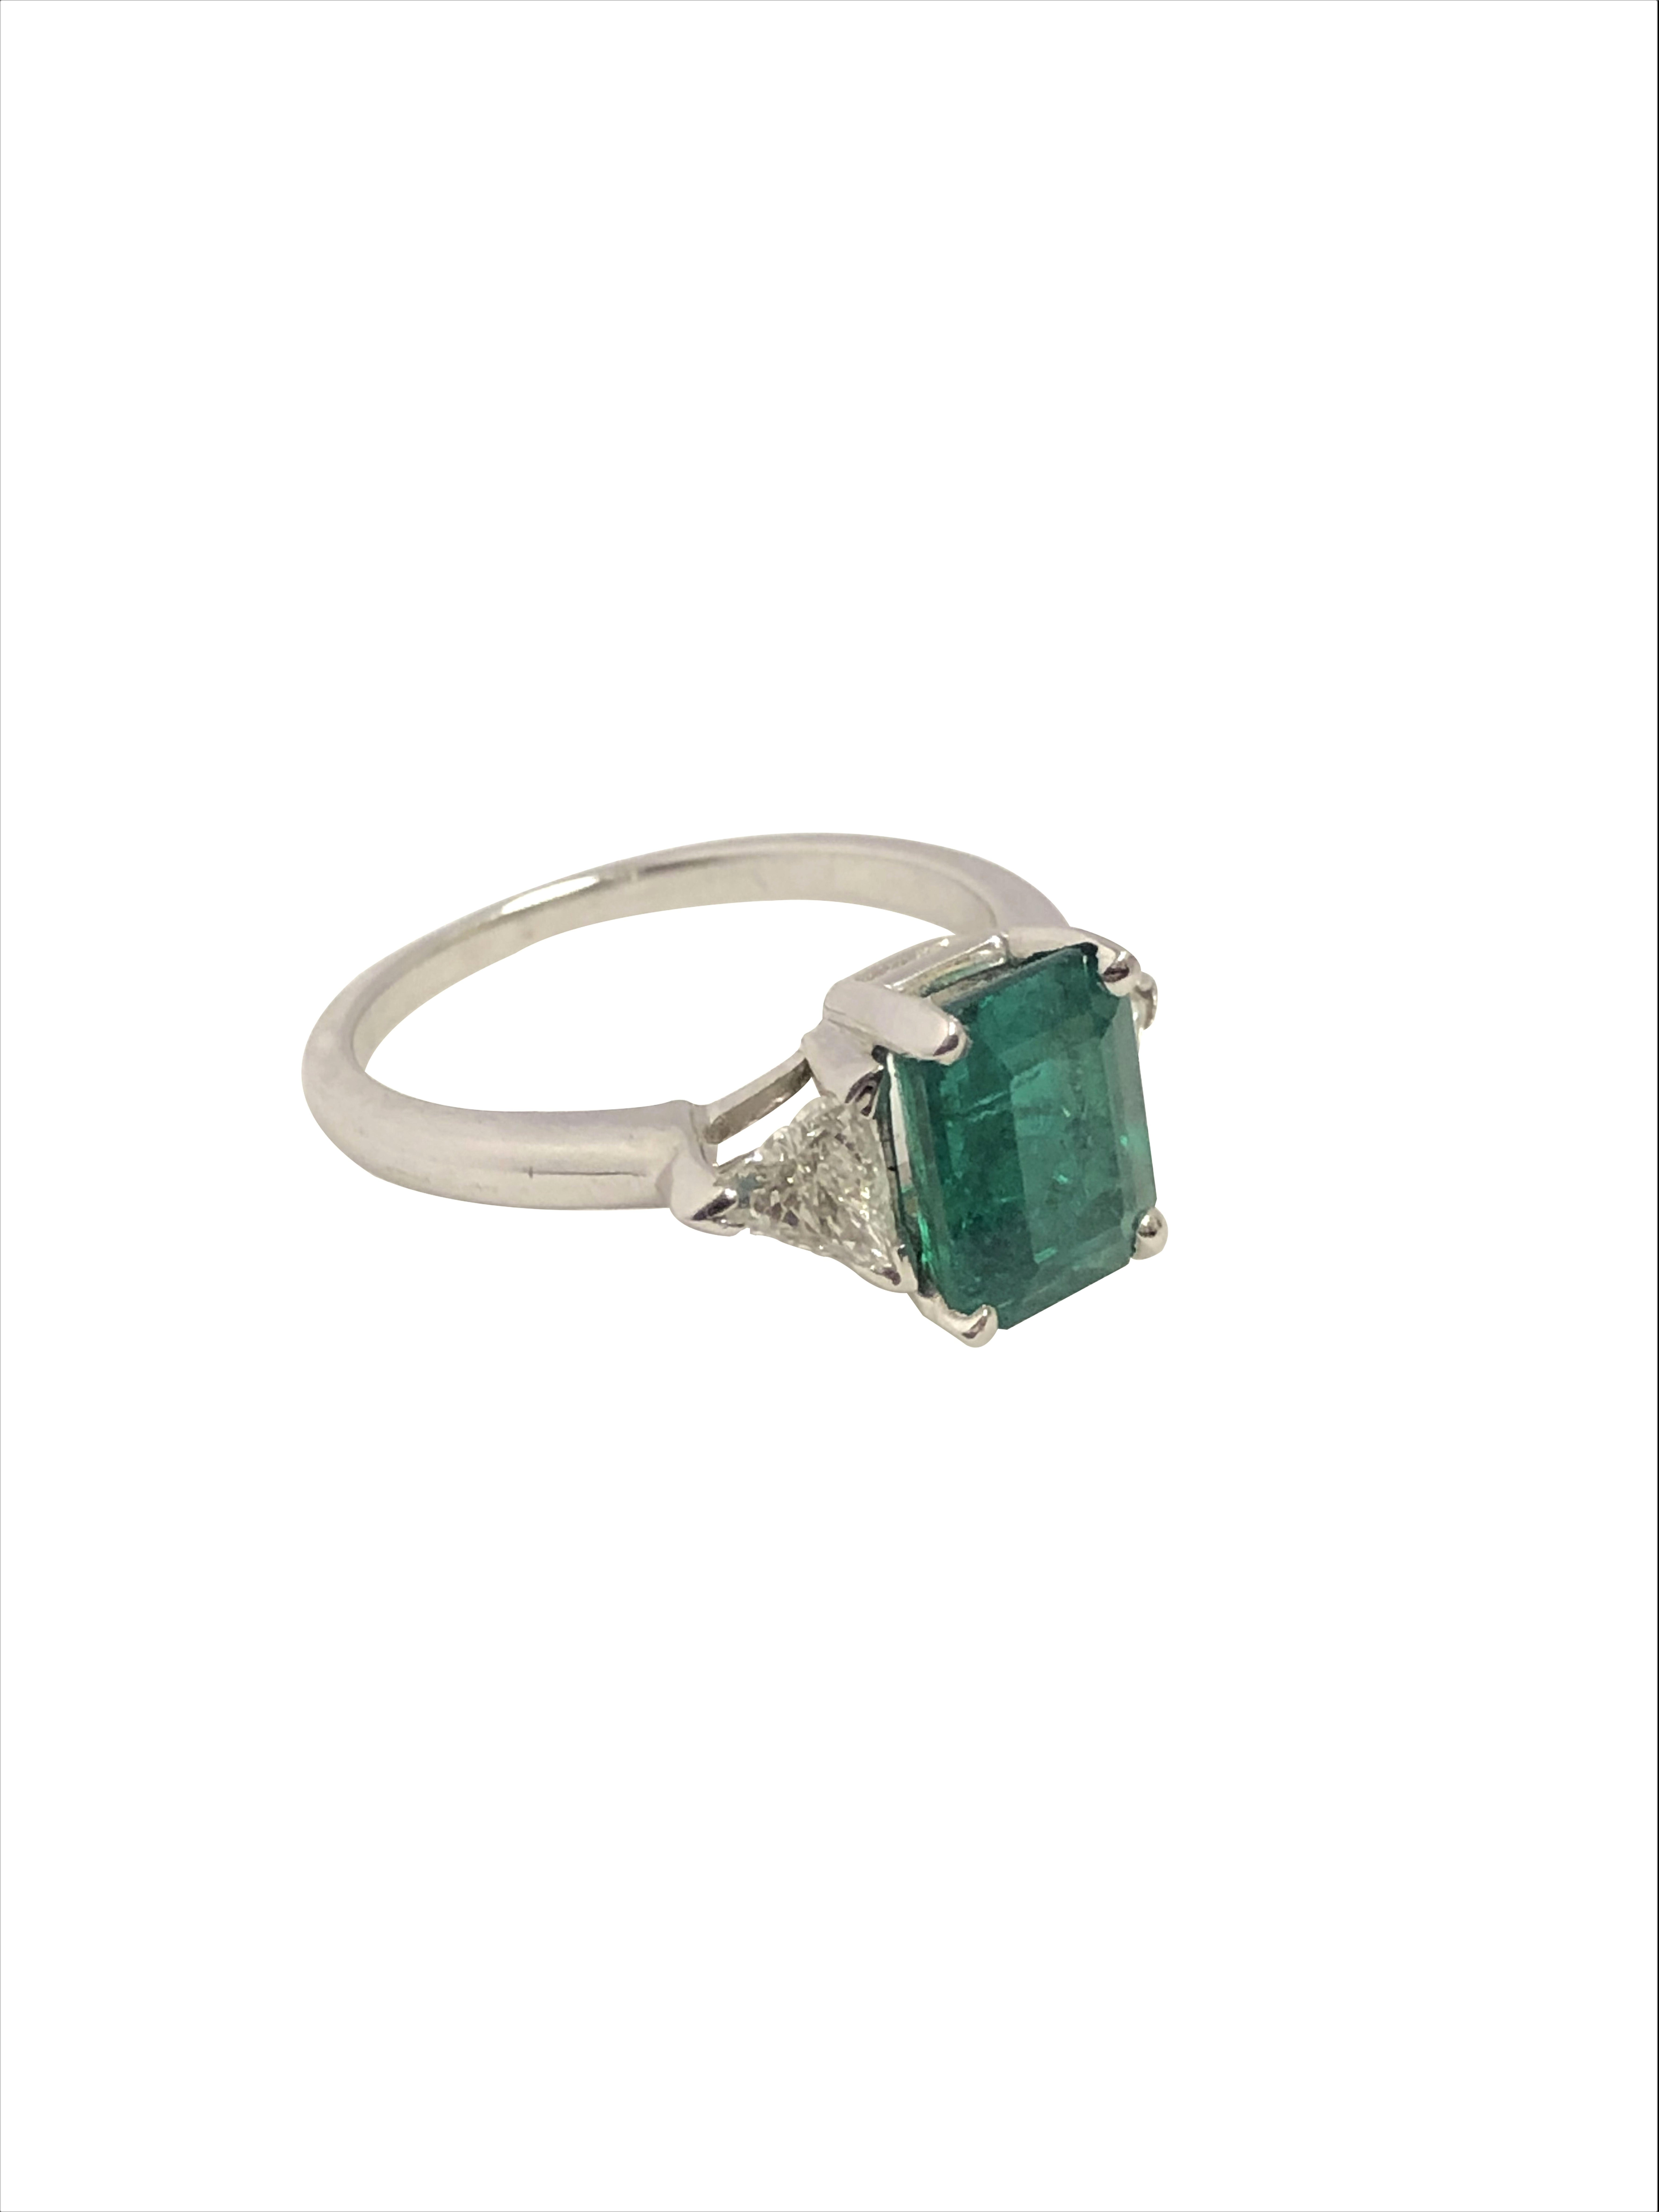 Circa 2015 Platinum Ring set with a Step Cut Emerald measuring 8 X 7 M.M. with a known weight of 2.29 Carats. The Emerald is Zambian in origin and having a very fine Deep rich color, the stone has been tested and shows minor oil treatment as is